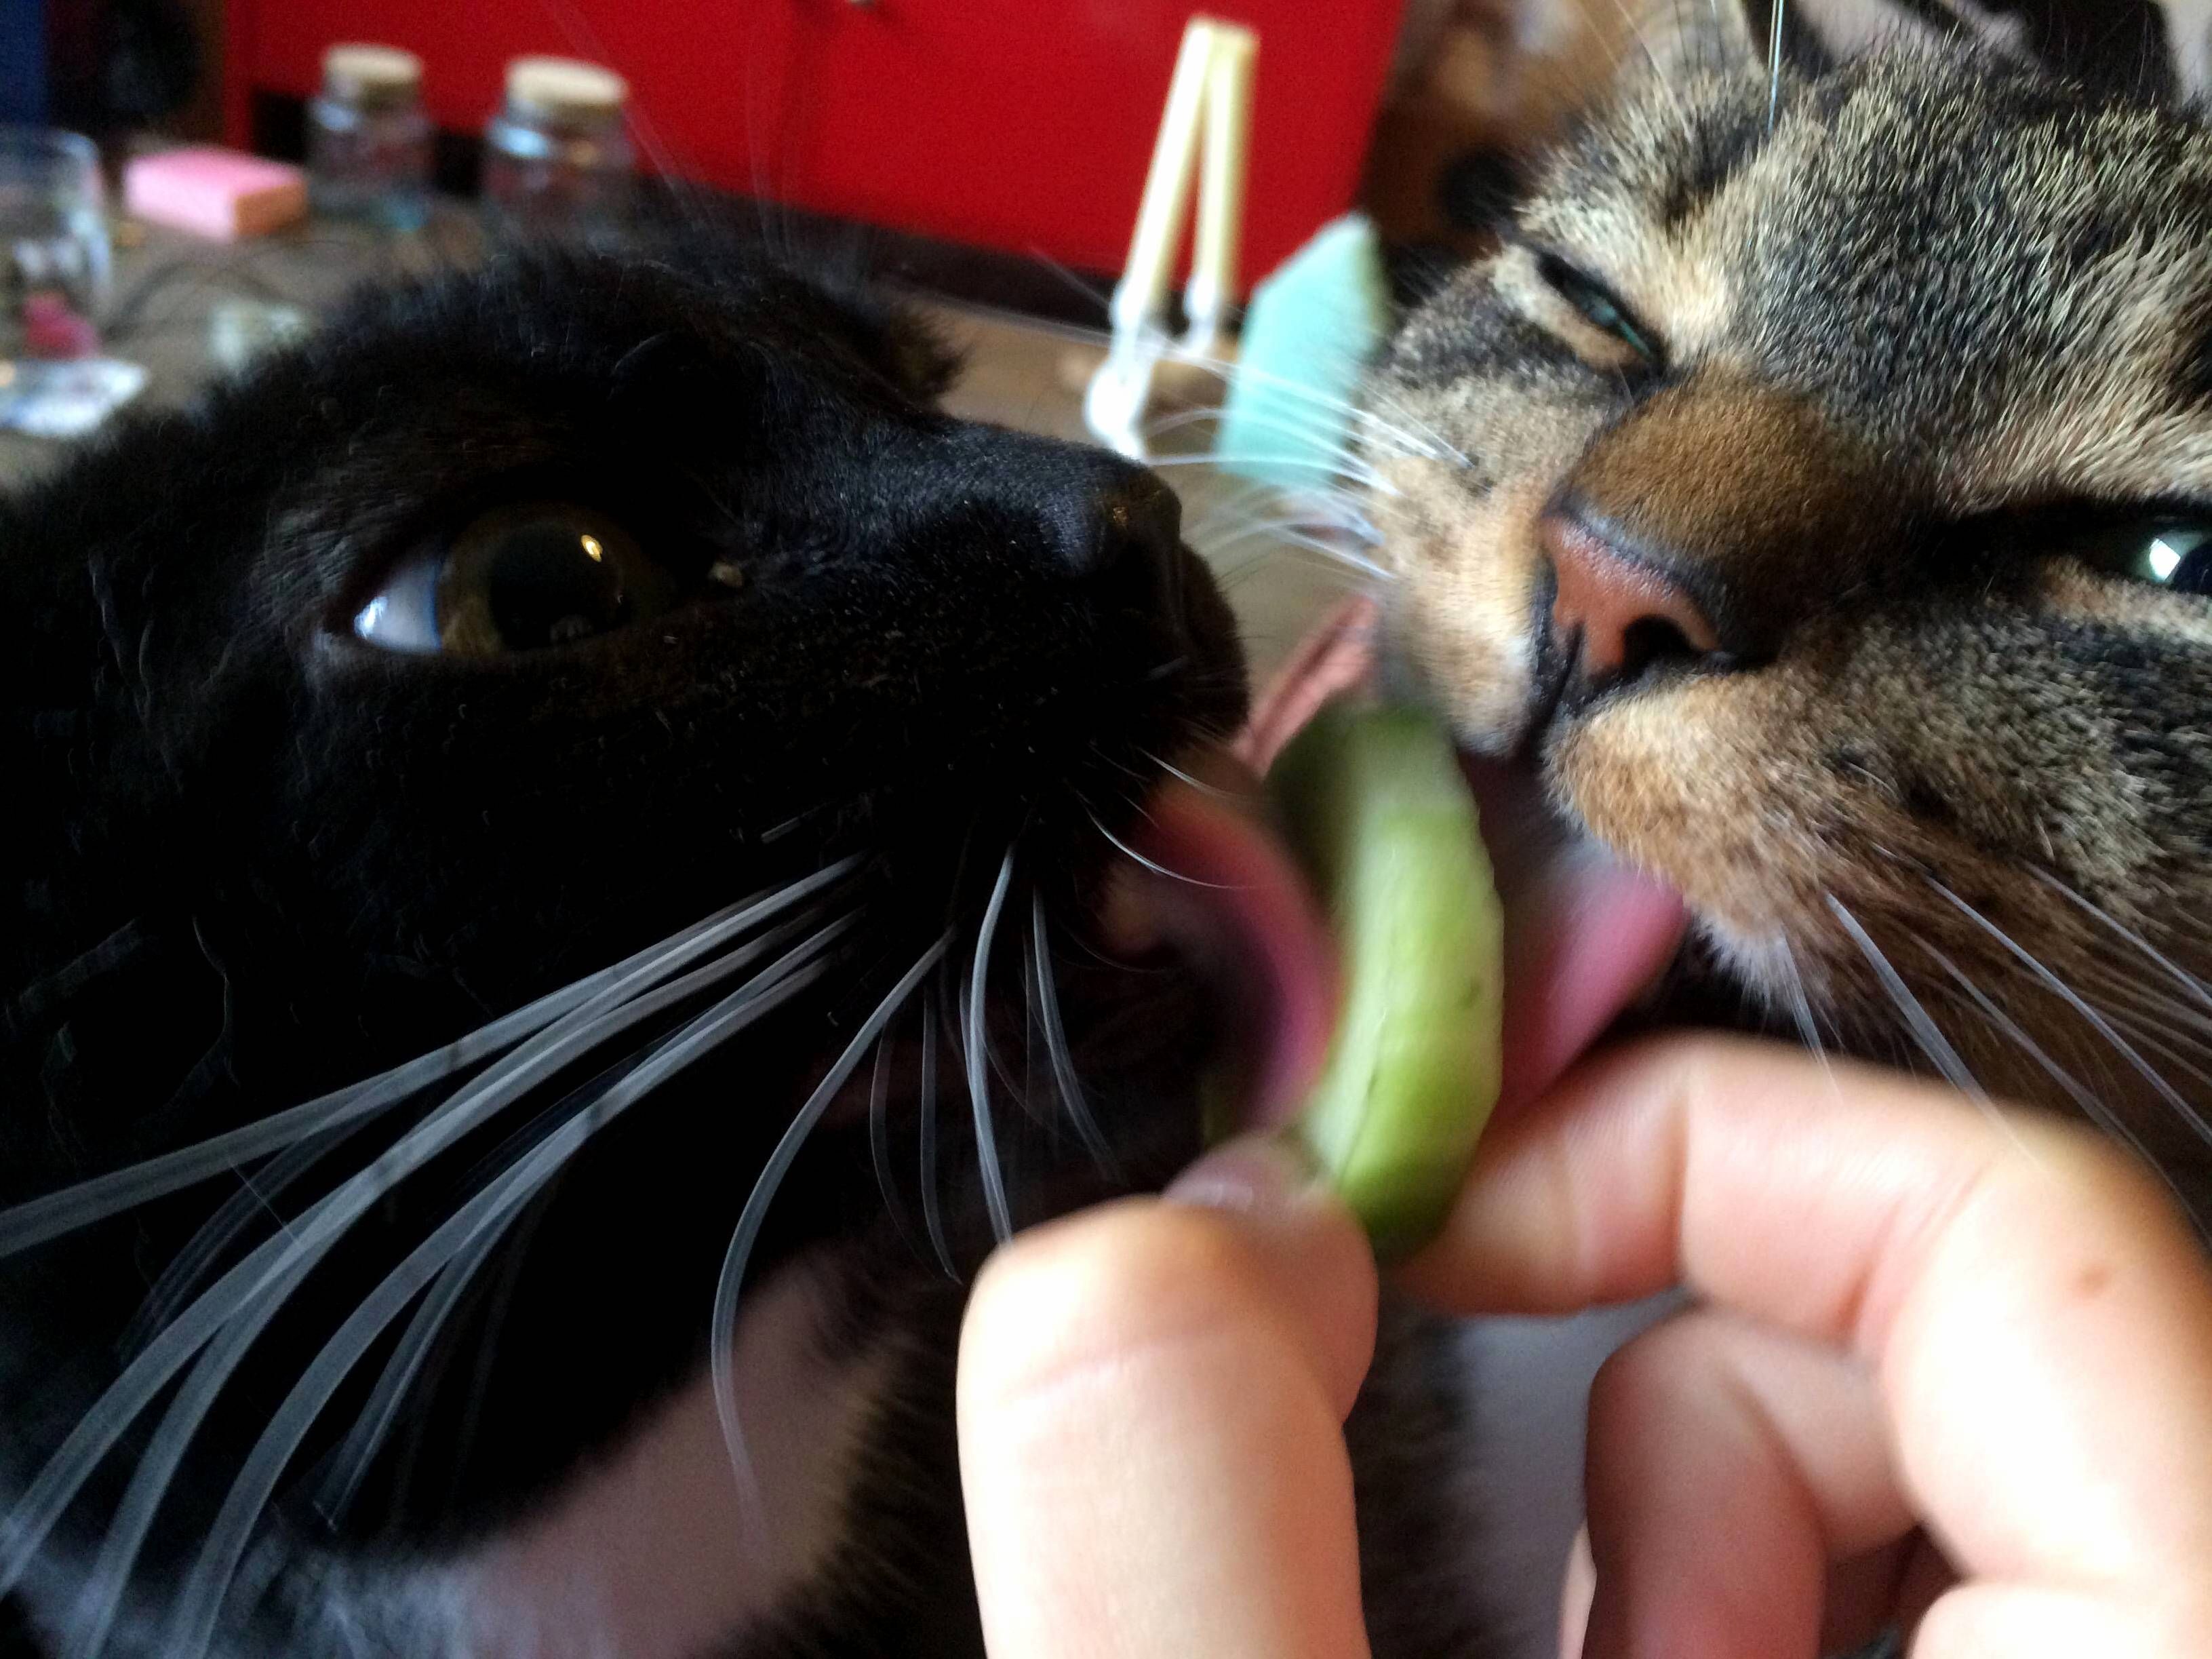 I never knew cats liked cucumber